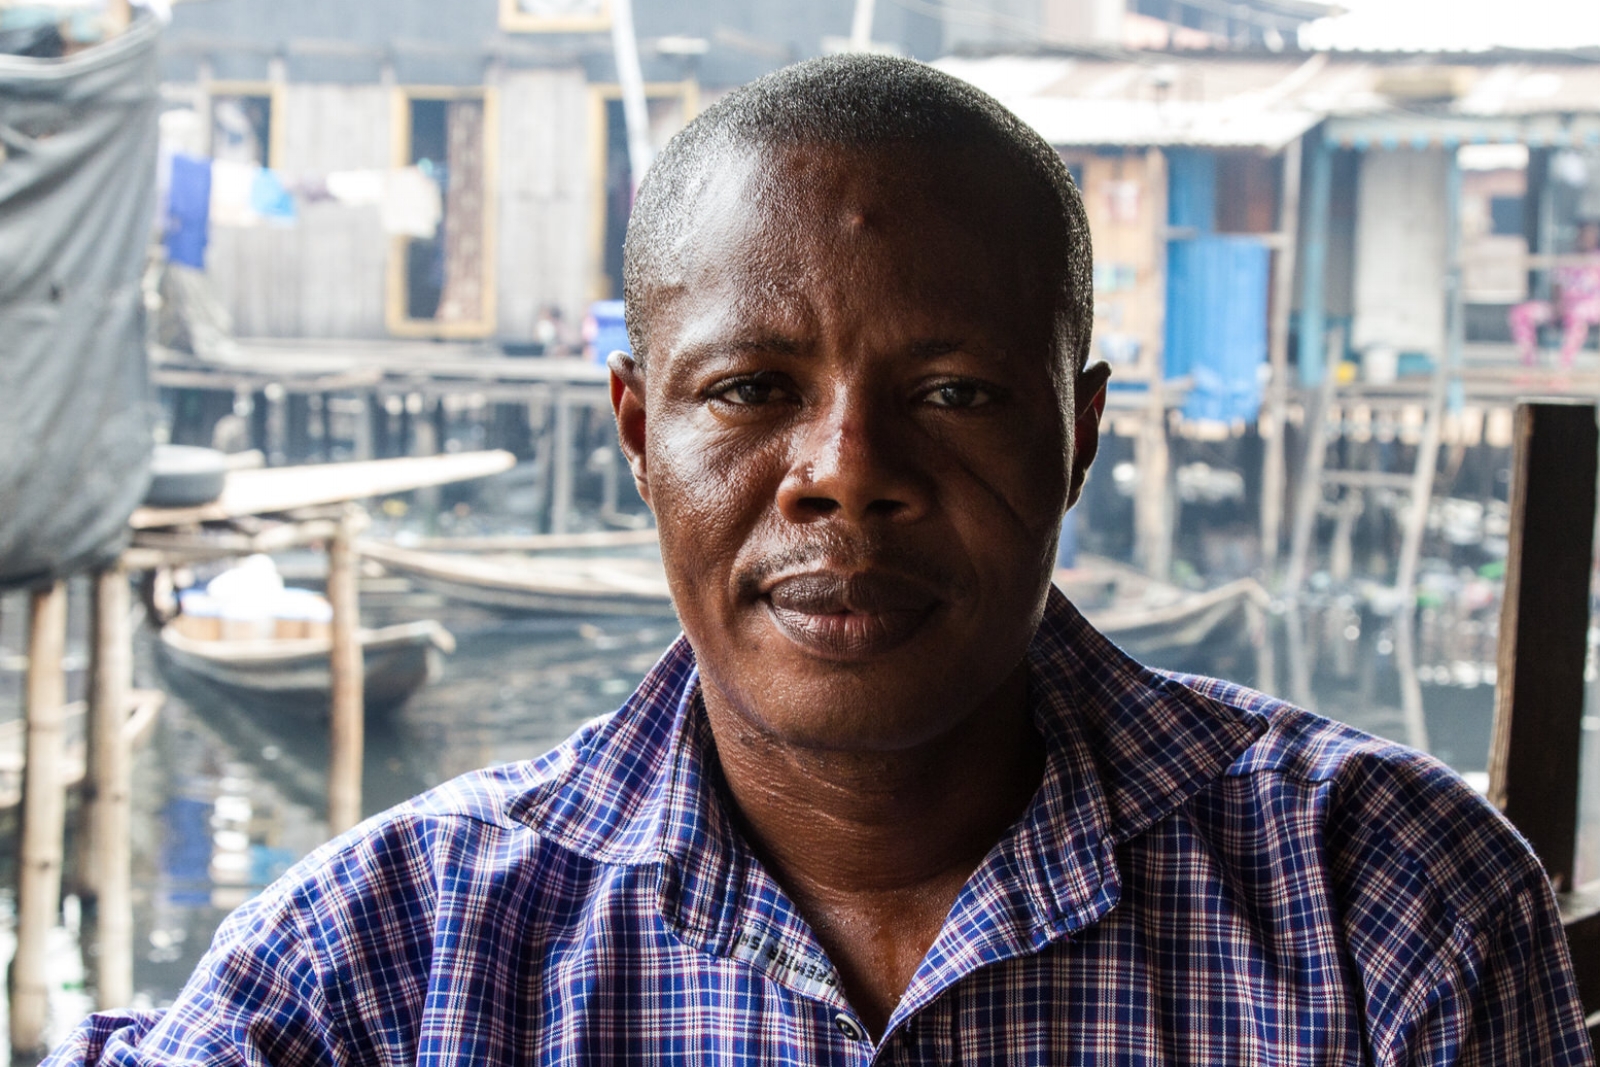  Gerard Avlessi is a community leader in Sogunro. He is also a member of the Nigerian Slum / Informal Settlement Federation, and has been involved in Federation activities for the last few years.  He and a few others have been leading the outreach to